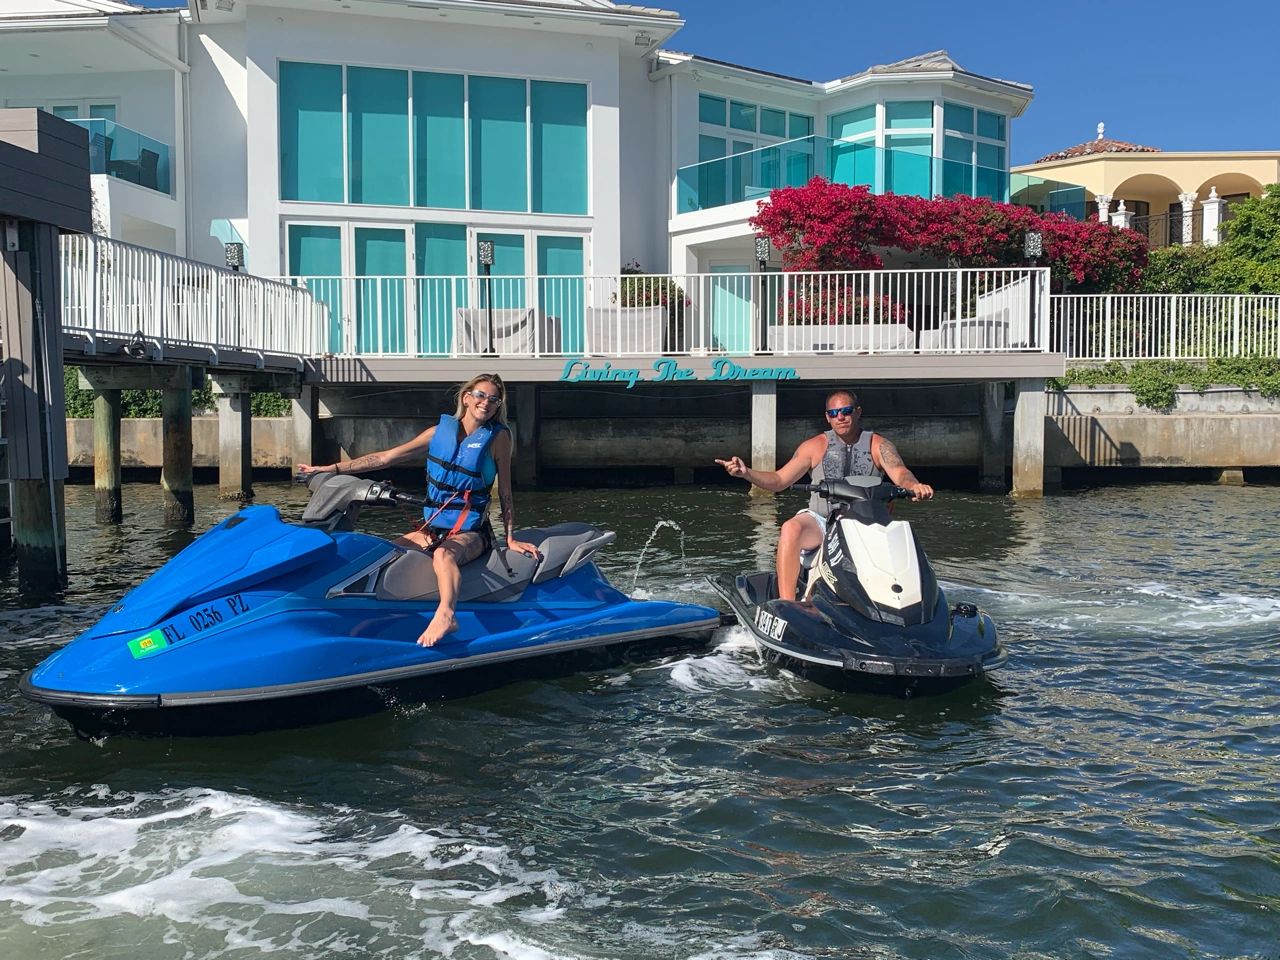 Enjoy Pompano Beach on the water! With our brand new 2020 Yamaha VX where every ride is personalized